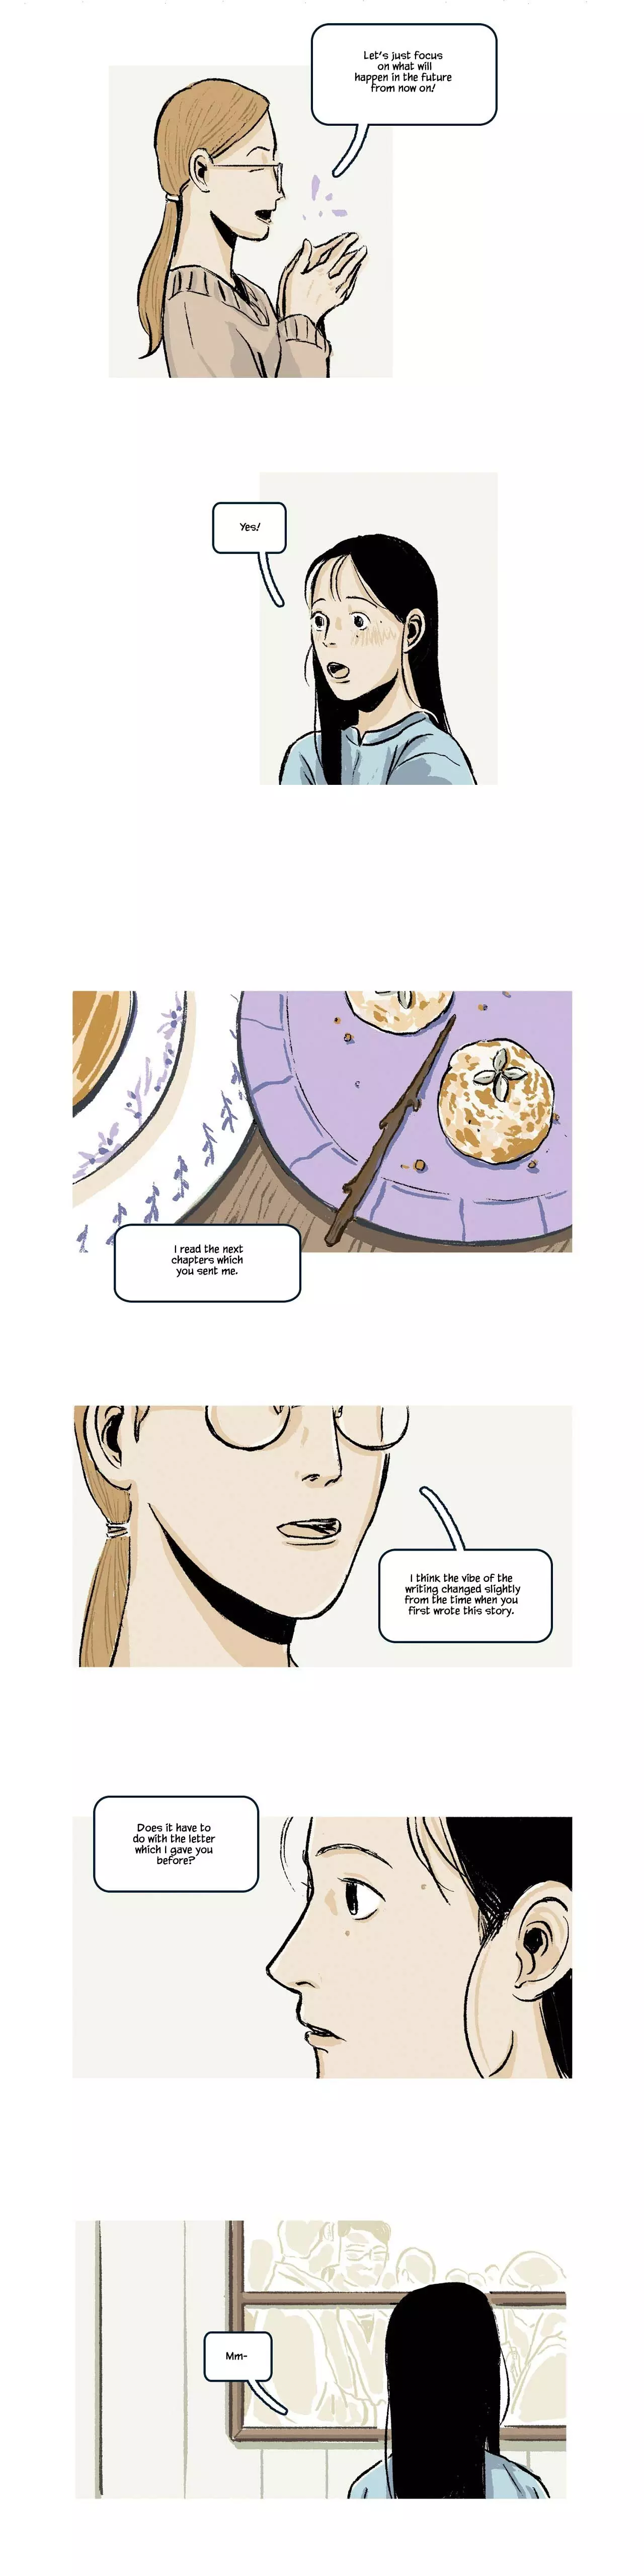 The Professor Who Reads Love Stories - 13 page 6-e3f2c626